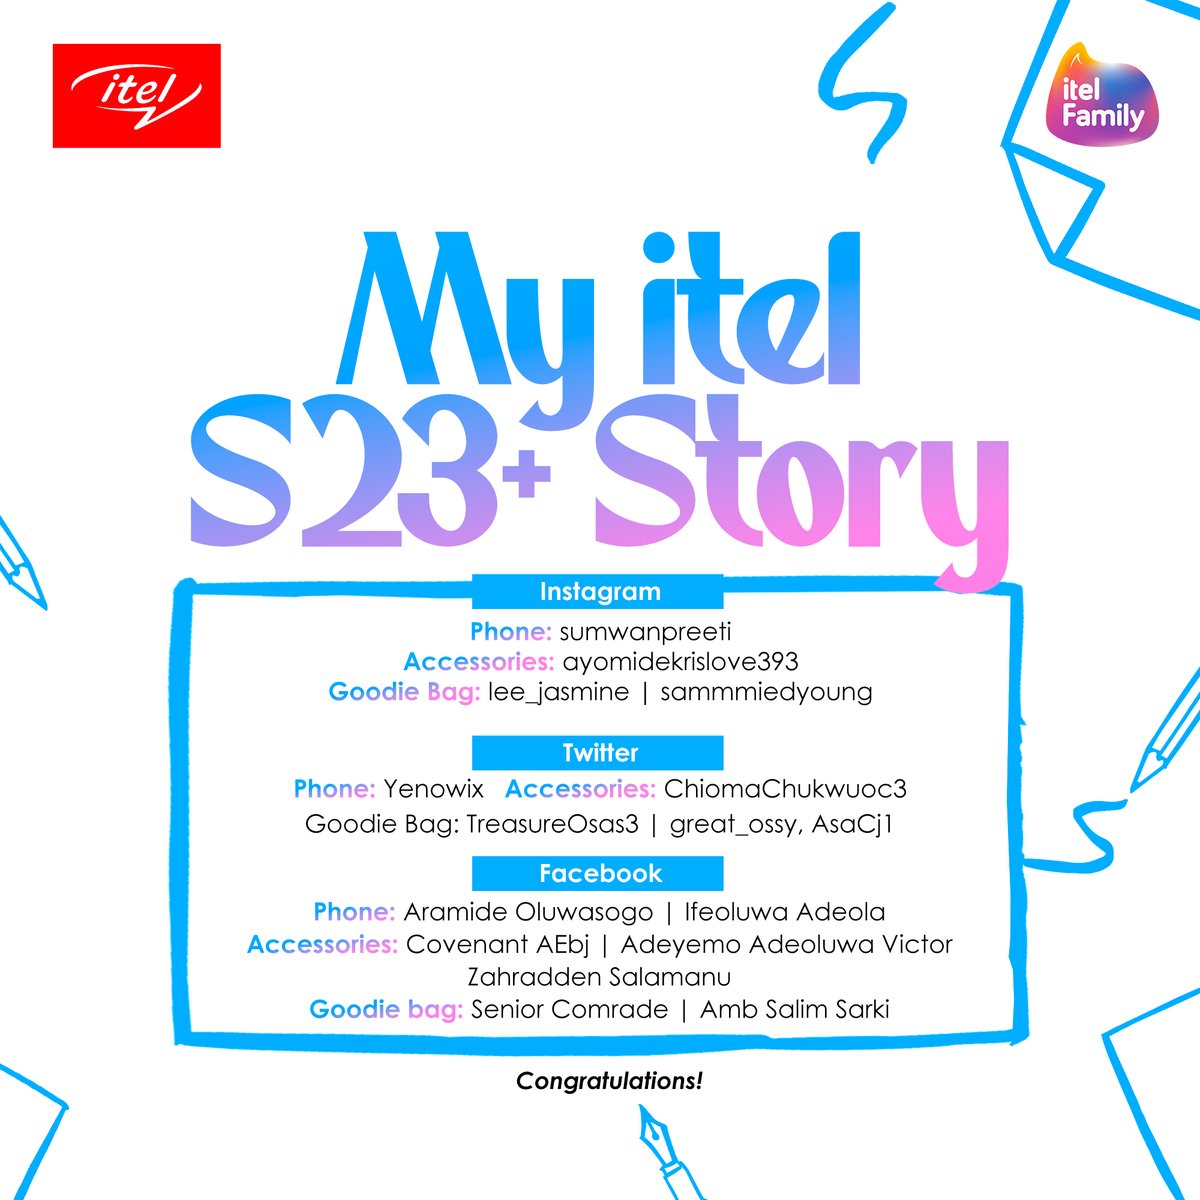 We saw creativity at its peak with some stories in the My itel S23+ Story challenge. 

Congratulations to the winners, your stories stood out! Kindly send us a DM to know how you can redeem your prize.

#itelS23Plus
#MyitelS23PlusStory